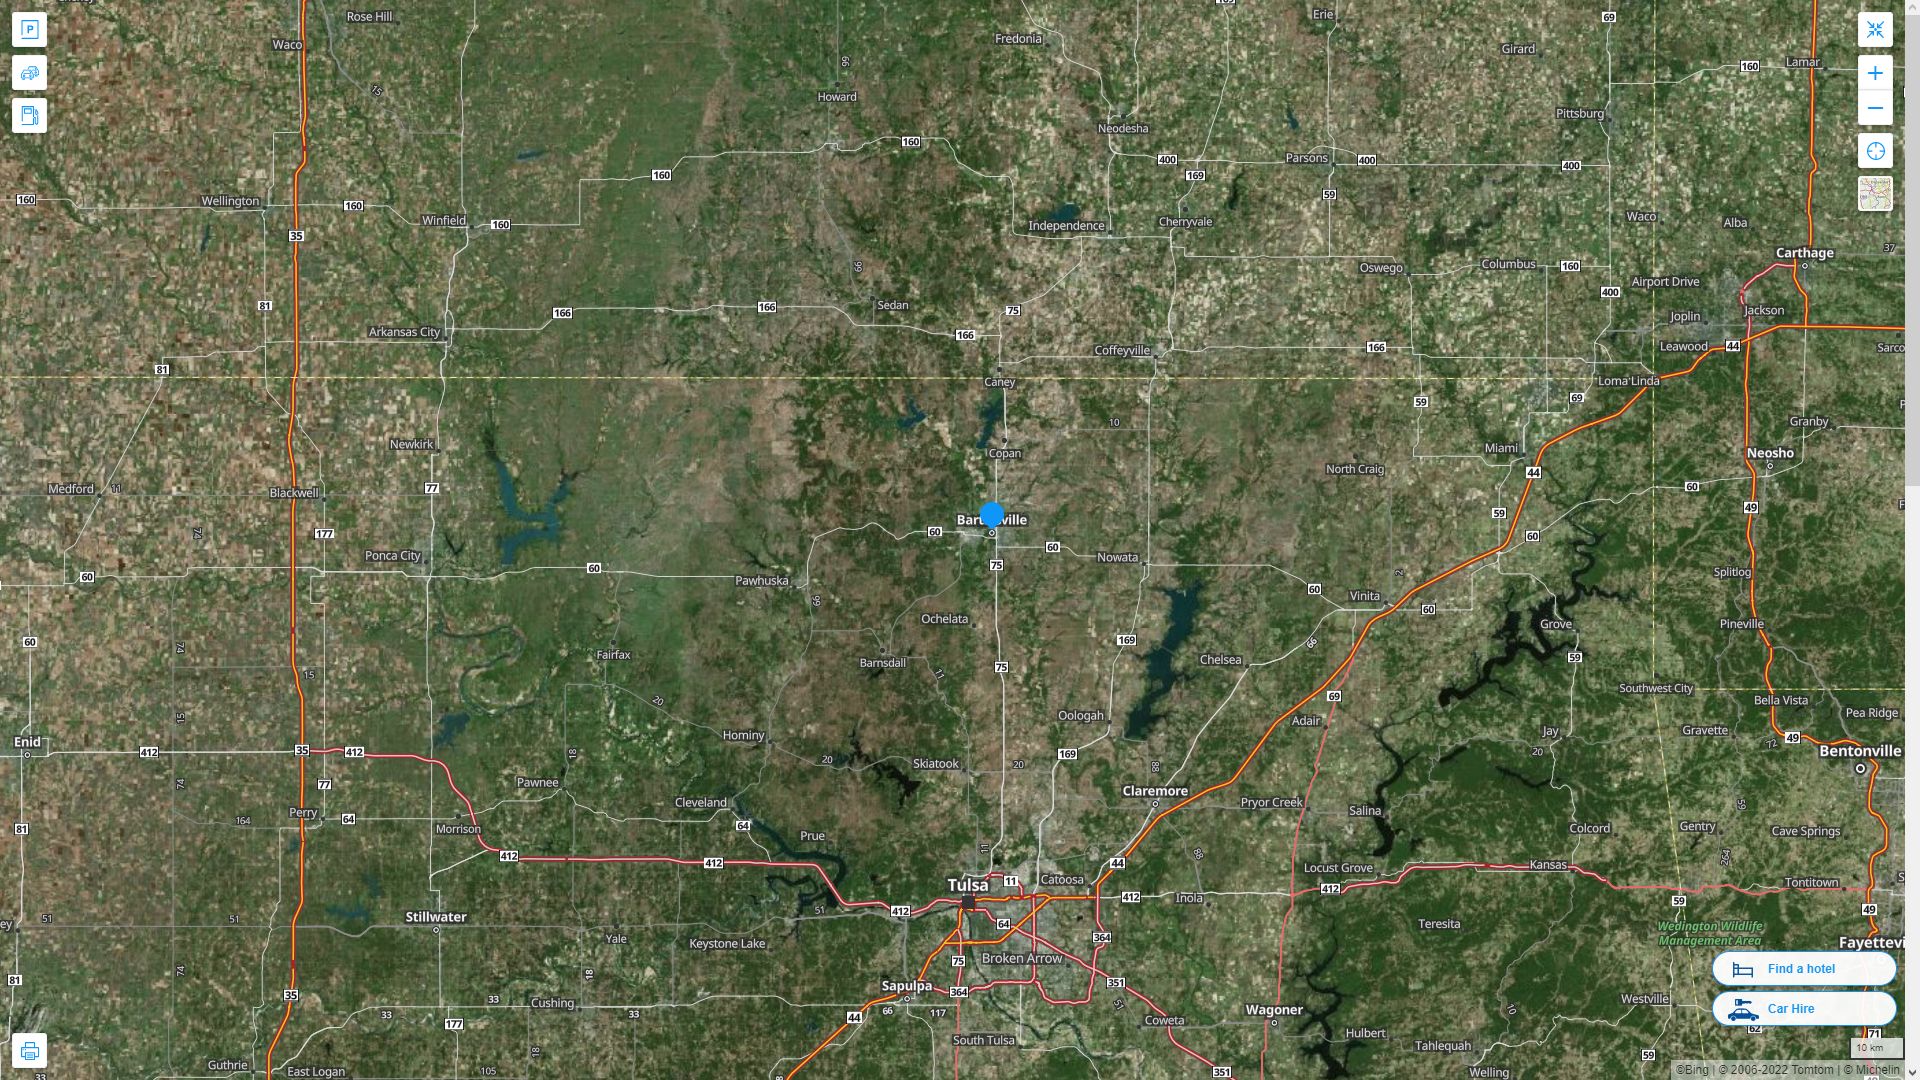 Bartlesville Oklahoma Highway and Road Map with Satellite View